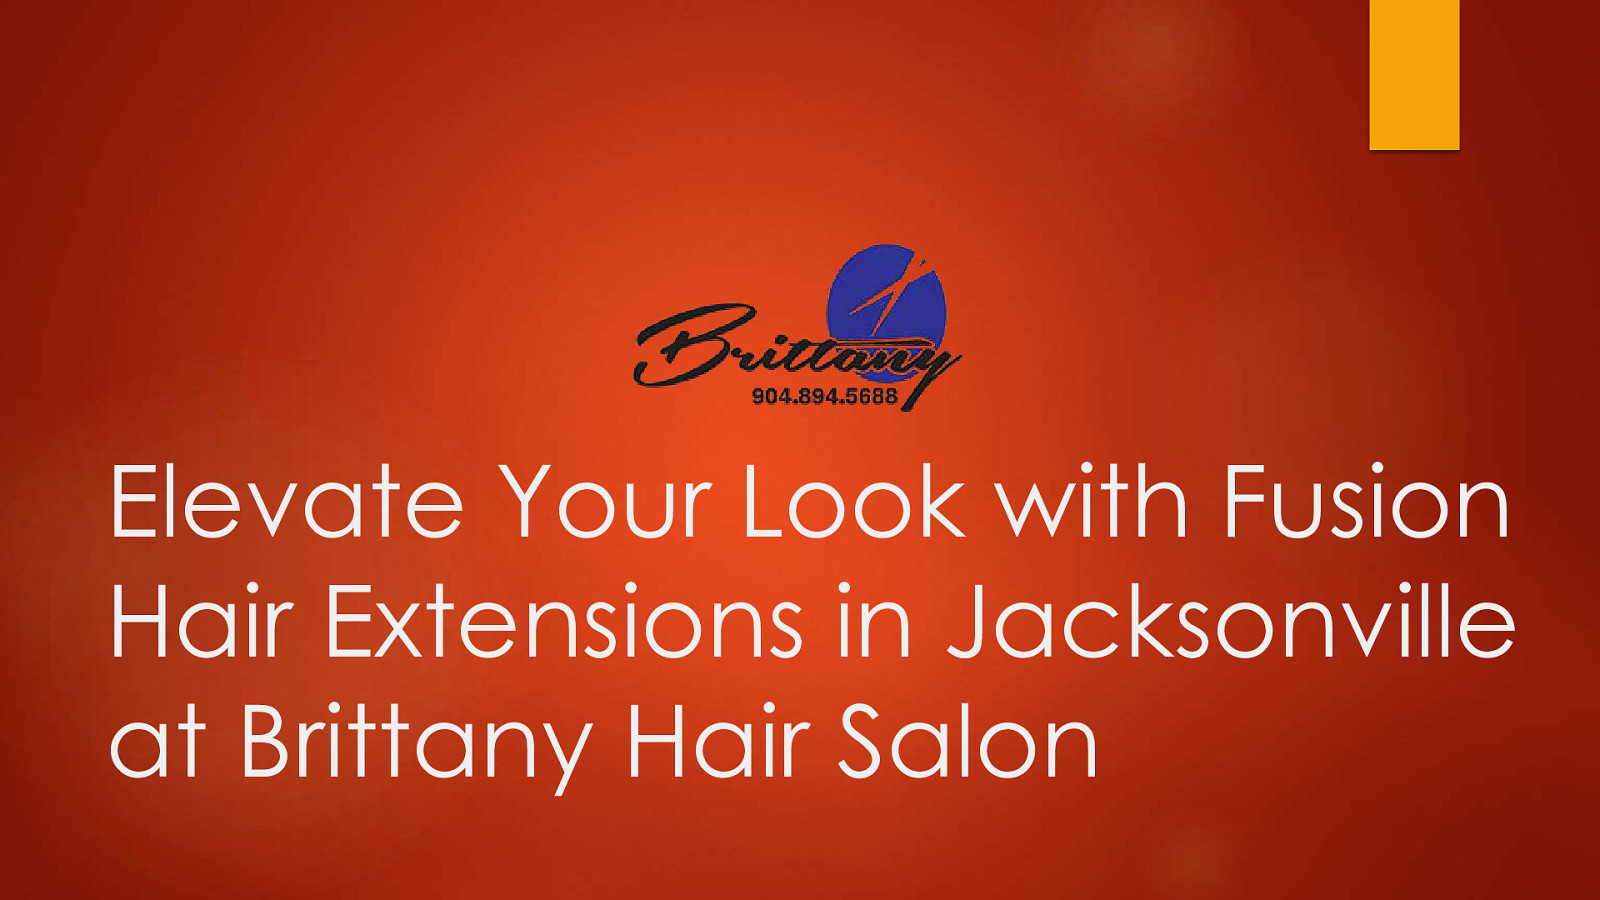 Fusion Hair Extensions at Brittany Hair Salon in Jacksonville